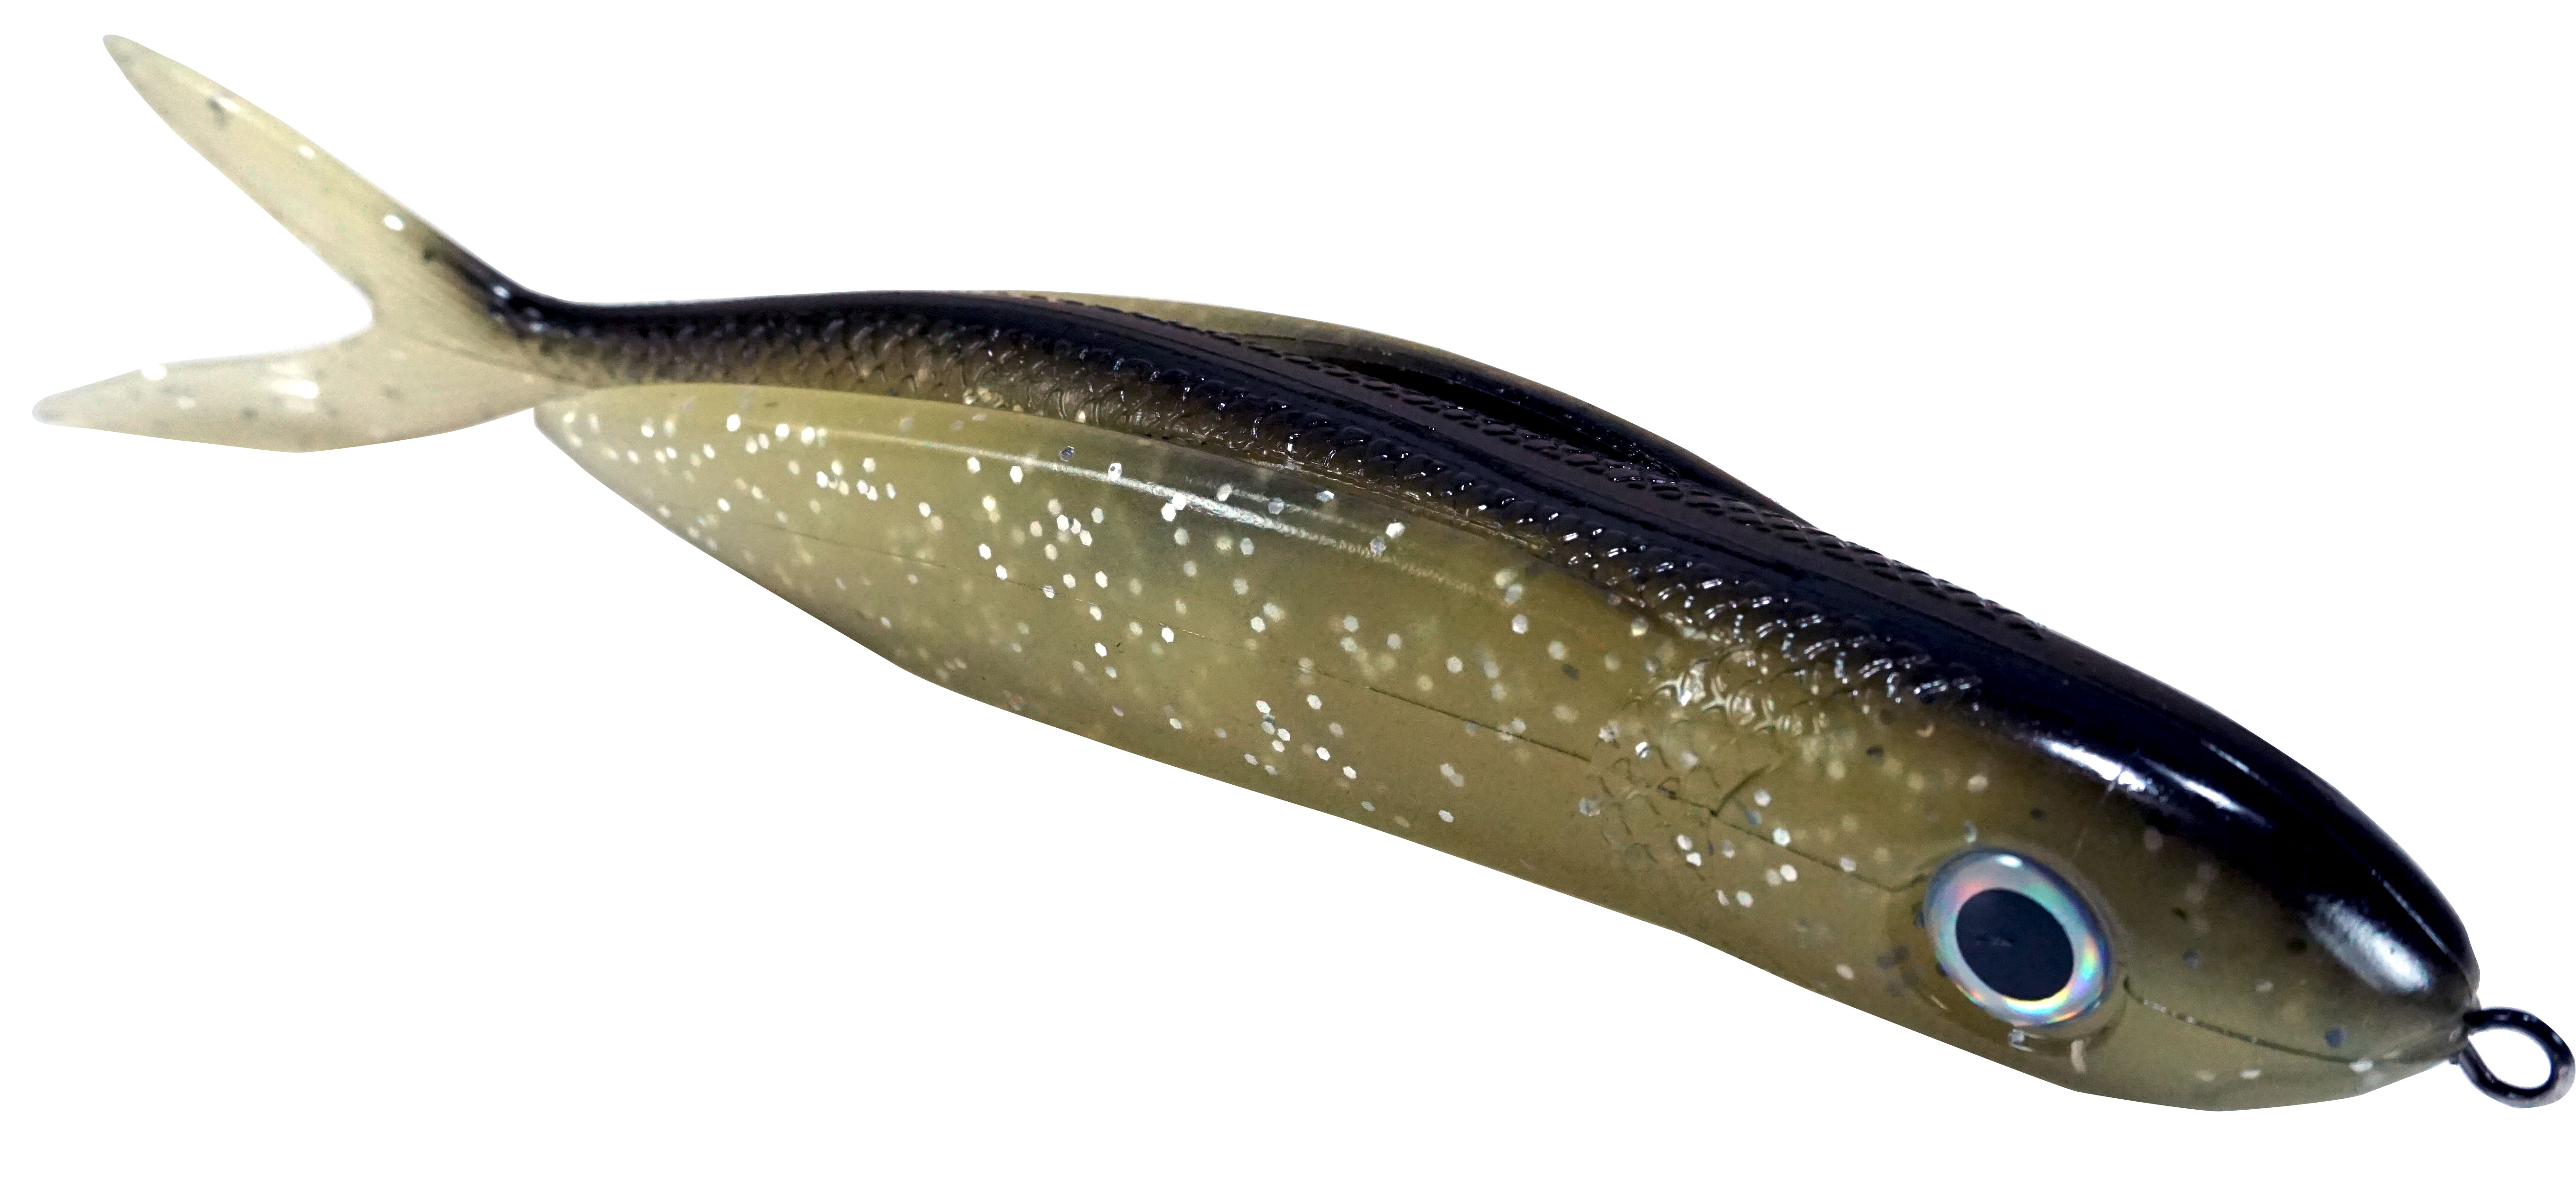 Almost Alive Lures 8.5" Soft Plastic Flying Fish with Swept Back Wing Bait Black/Glitter/Luminous Belly with Spring